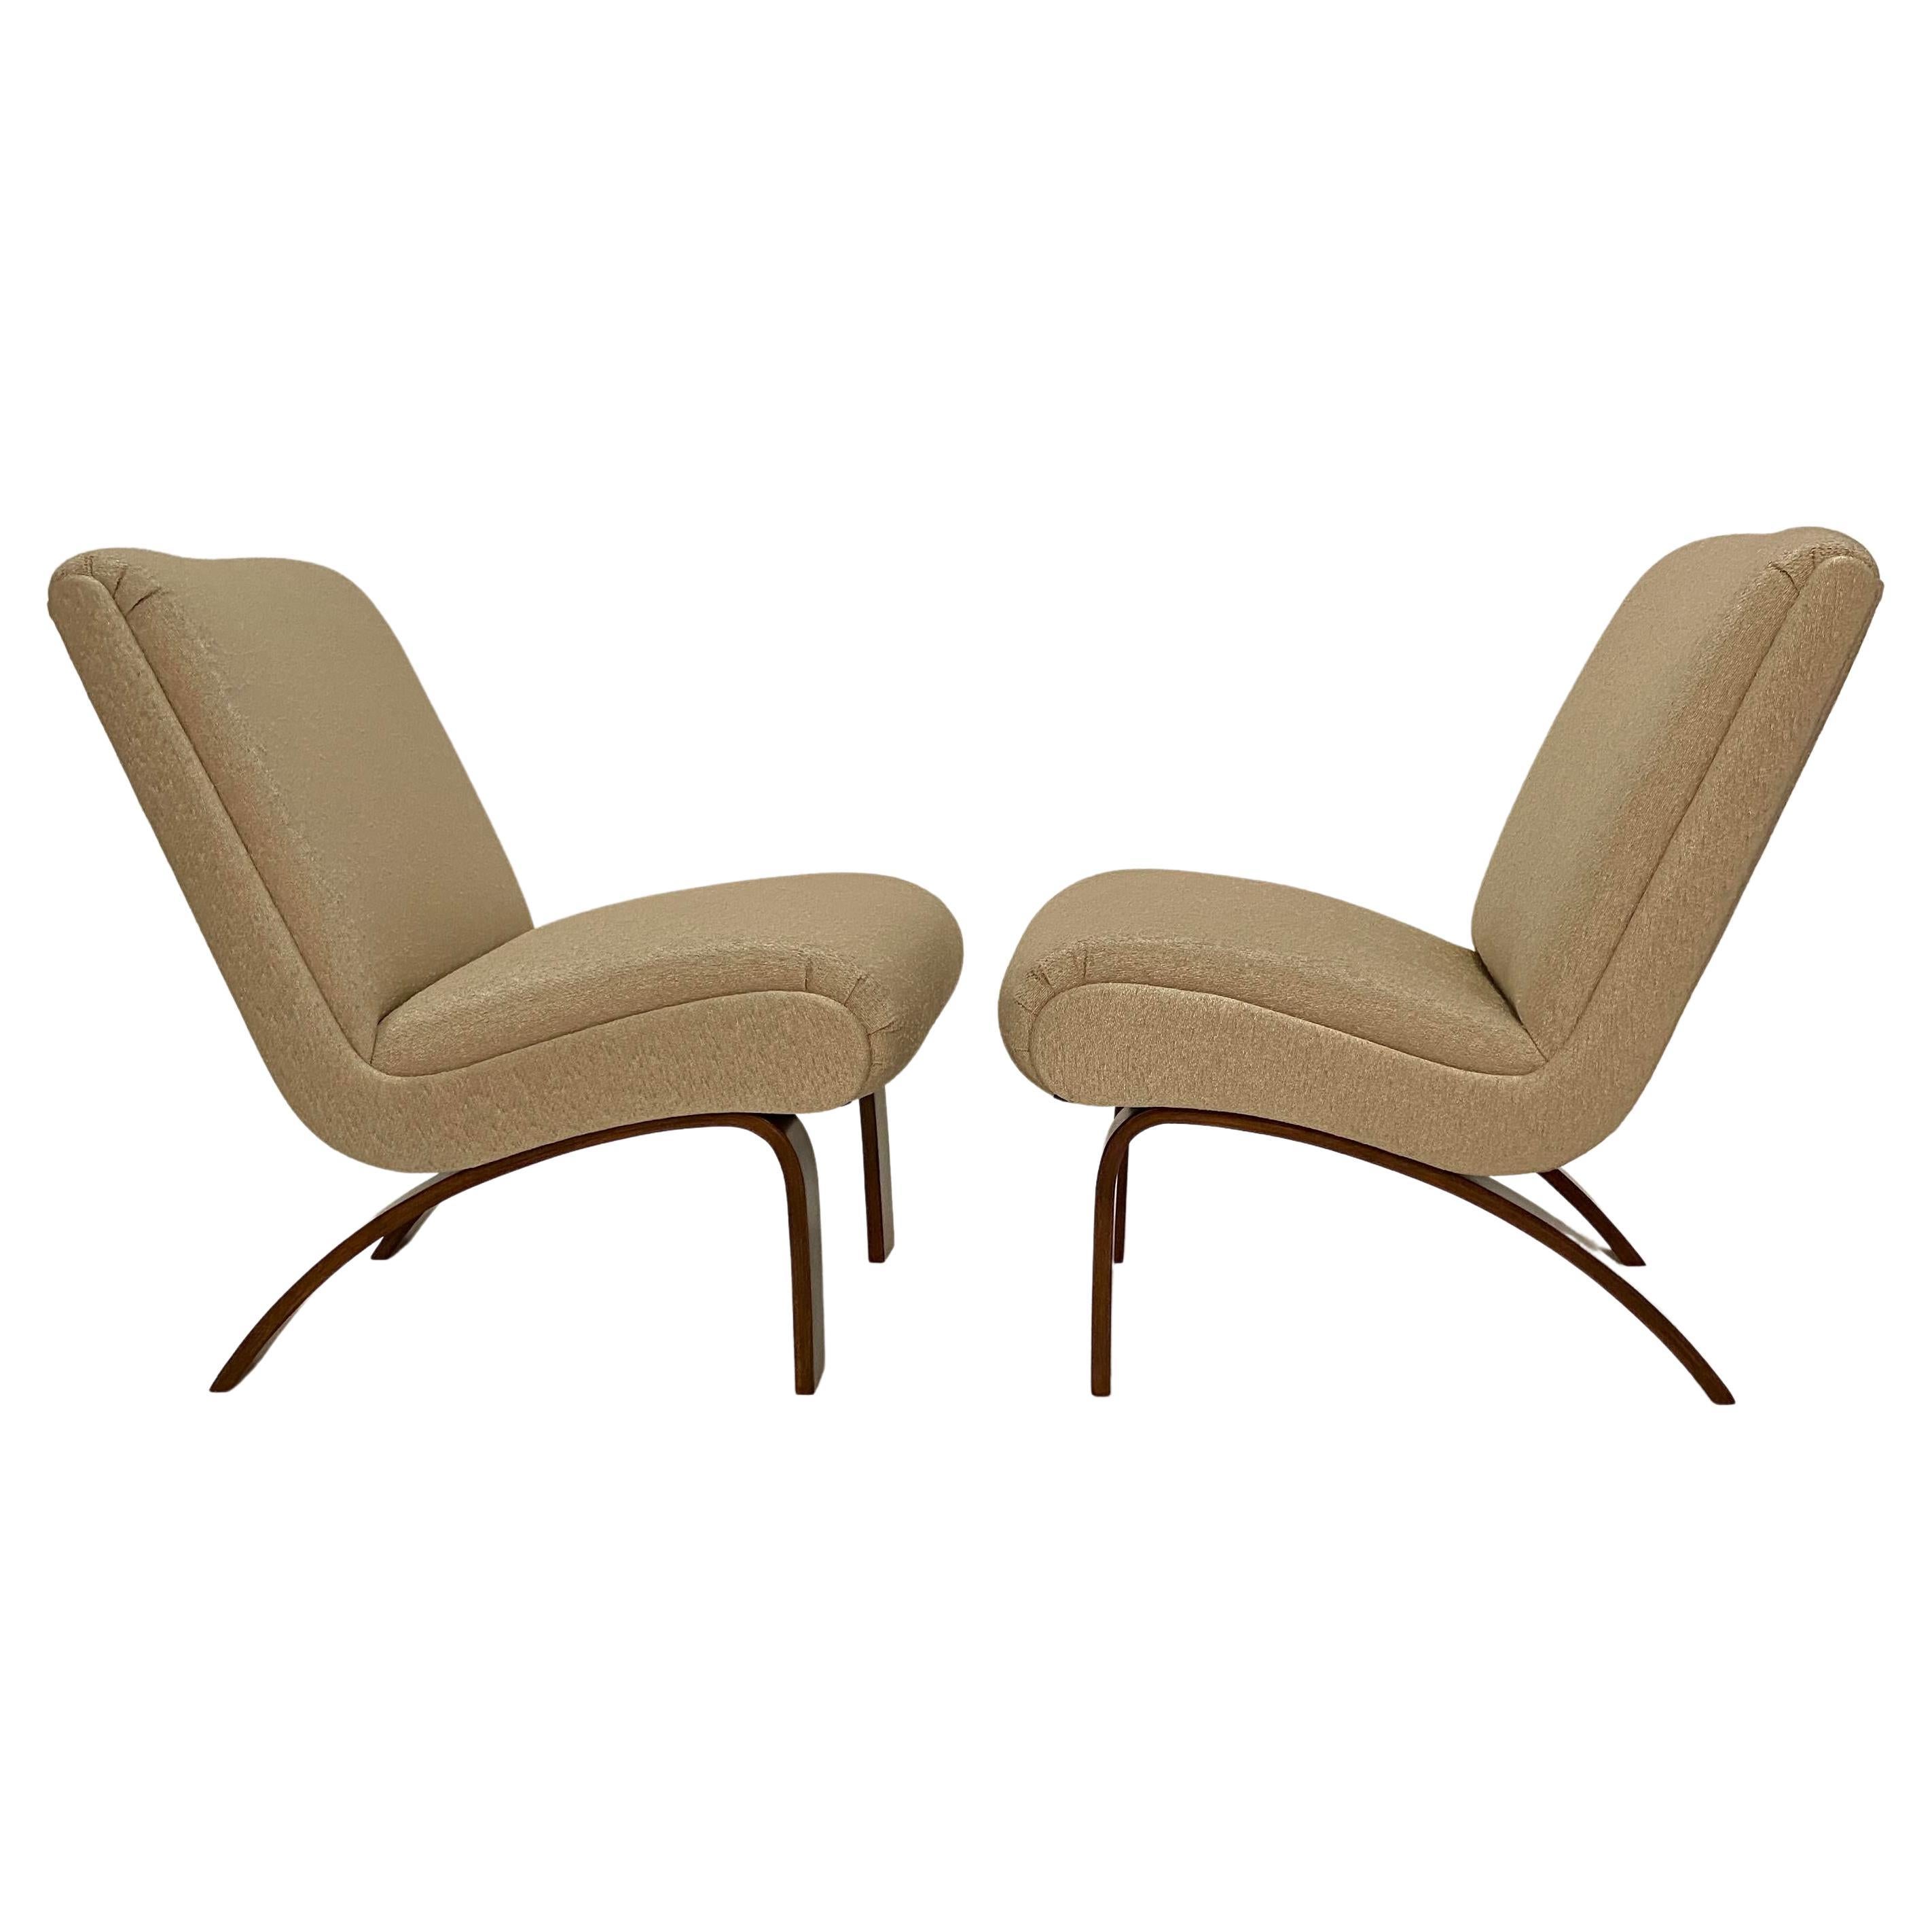 Pair of Thonet Slipper Chairs in Chenille Fabric and Bentwood Walnut Legs